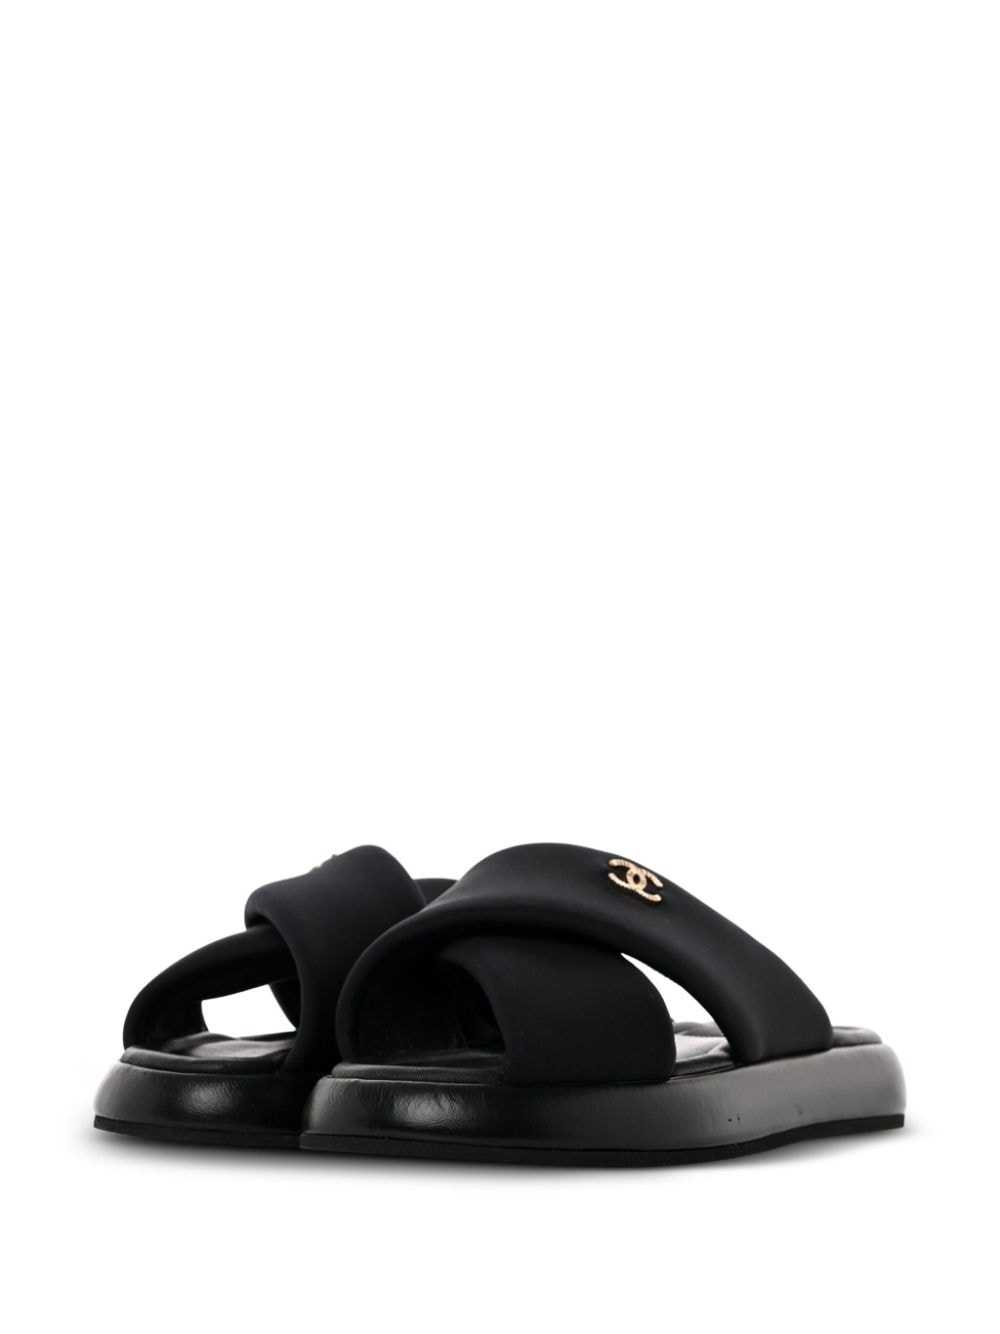 CHANEL Pre-Owned CC criss-cross pool slides - Bla… - image 2